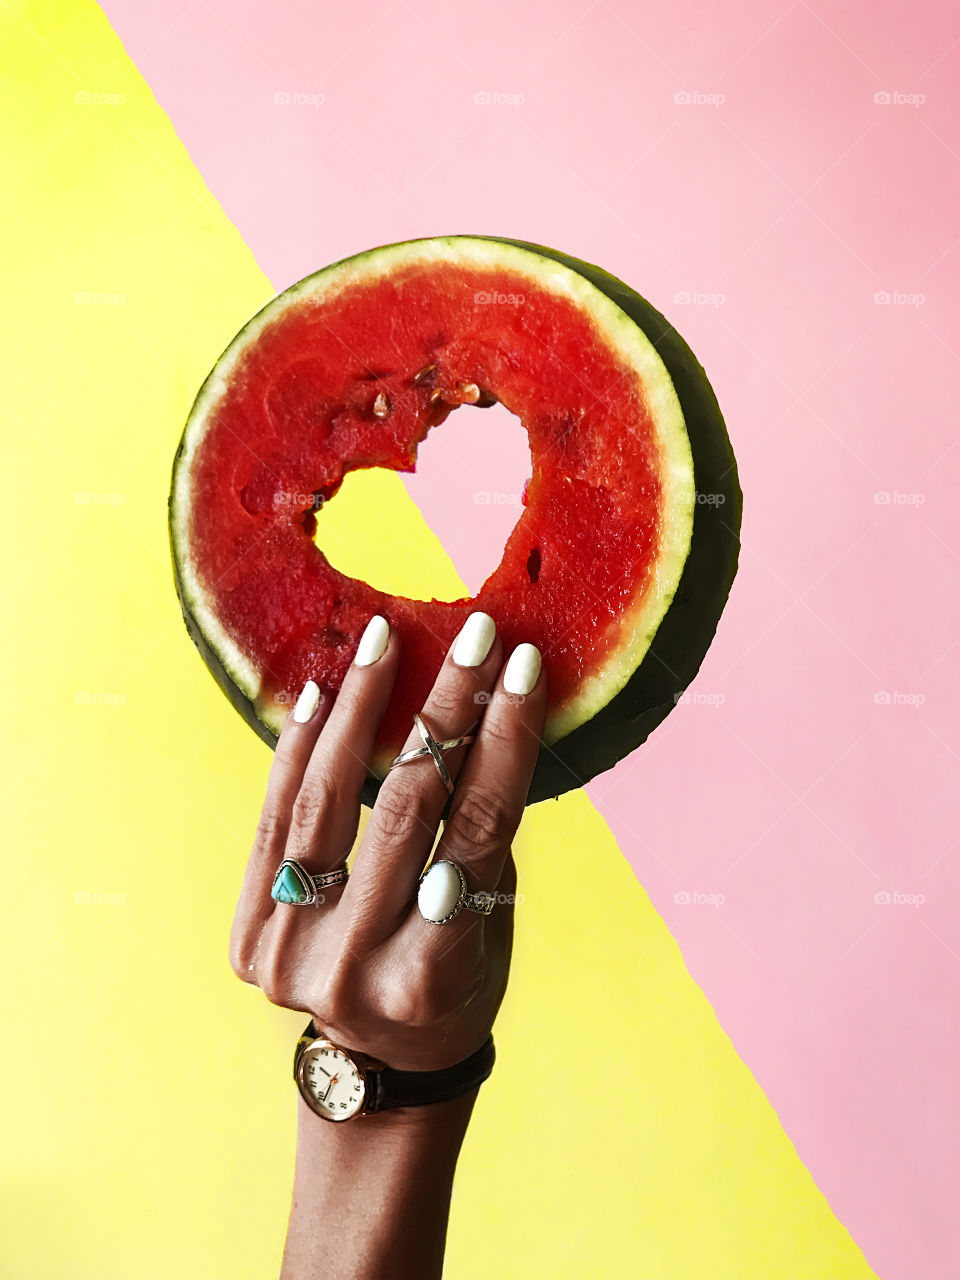 Female hand with white nails and fashionable accessories holding a red watermelon with a heart shaped hole on colorful pastel background 